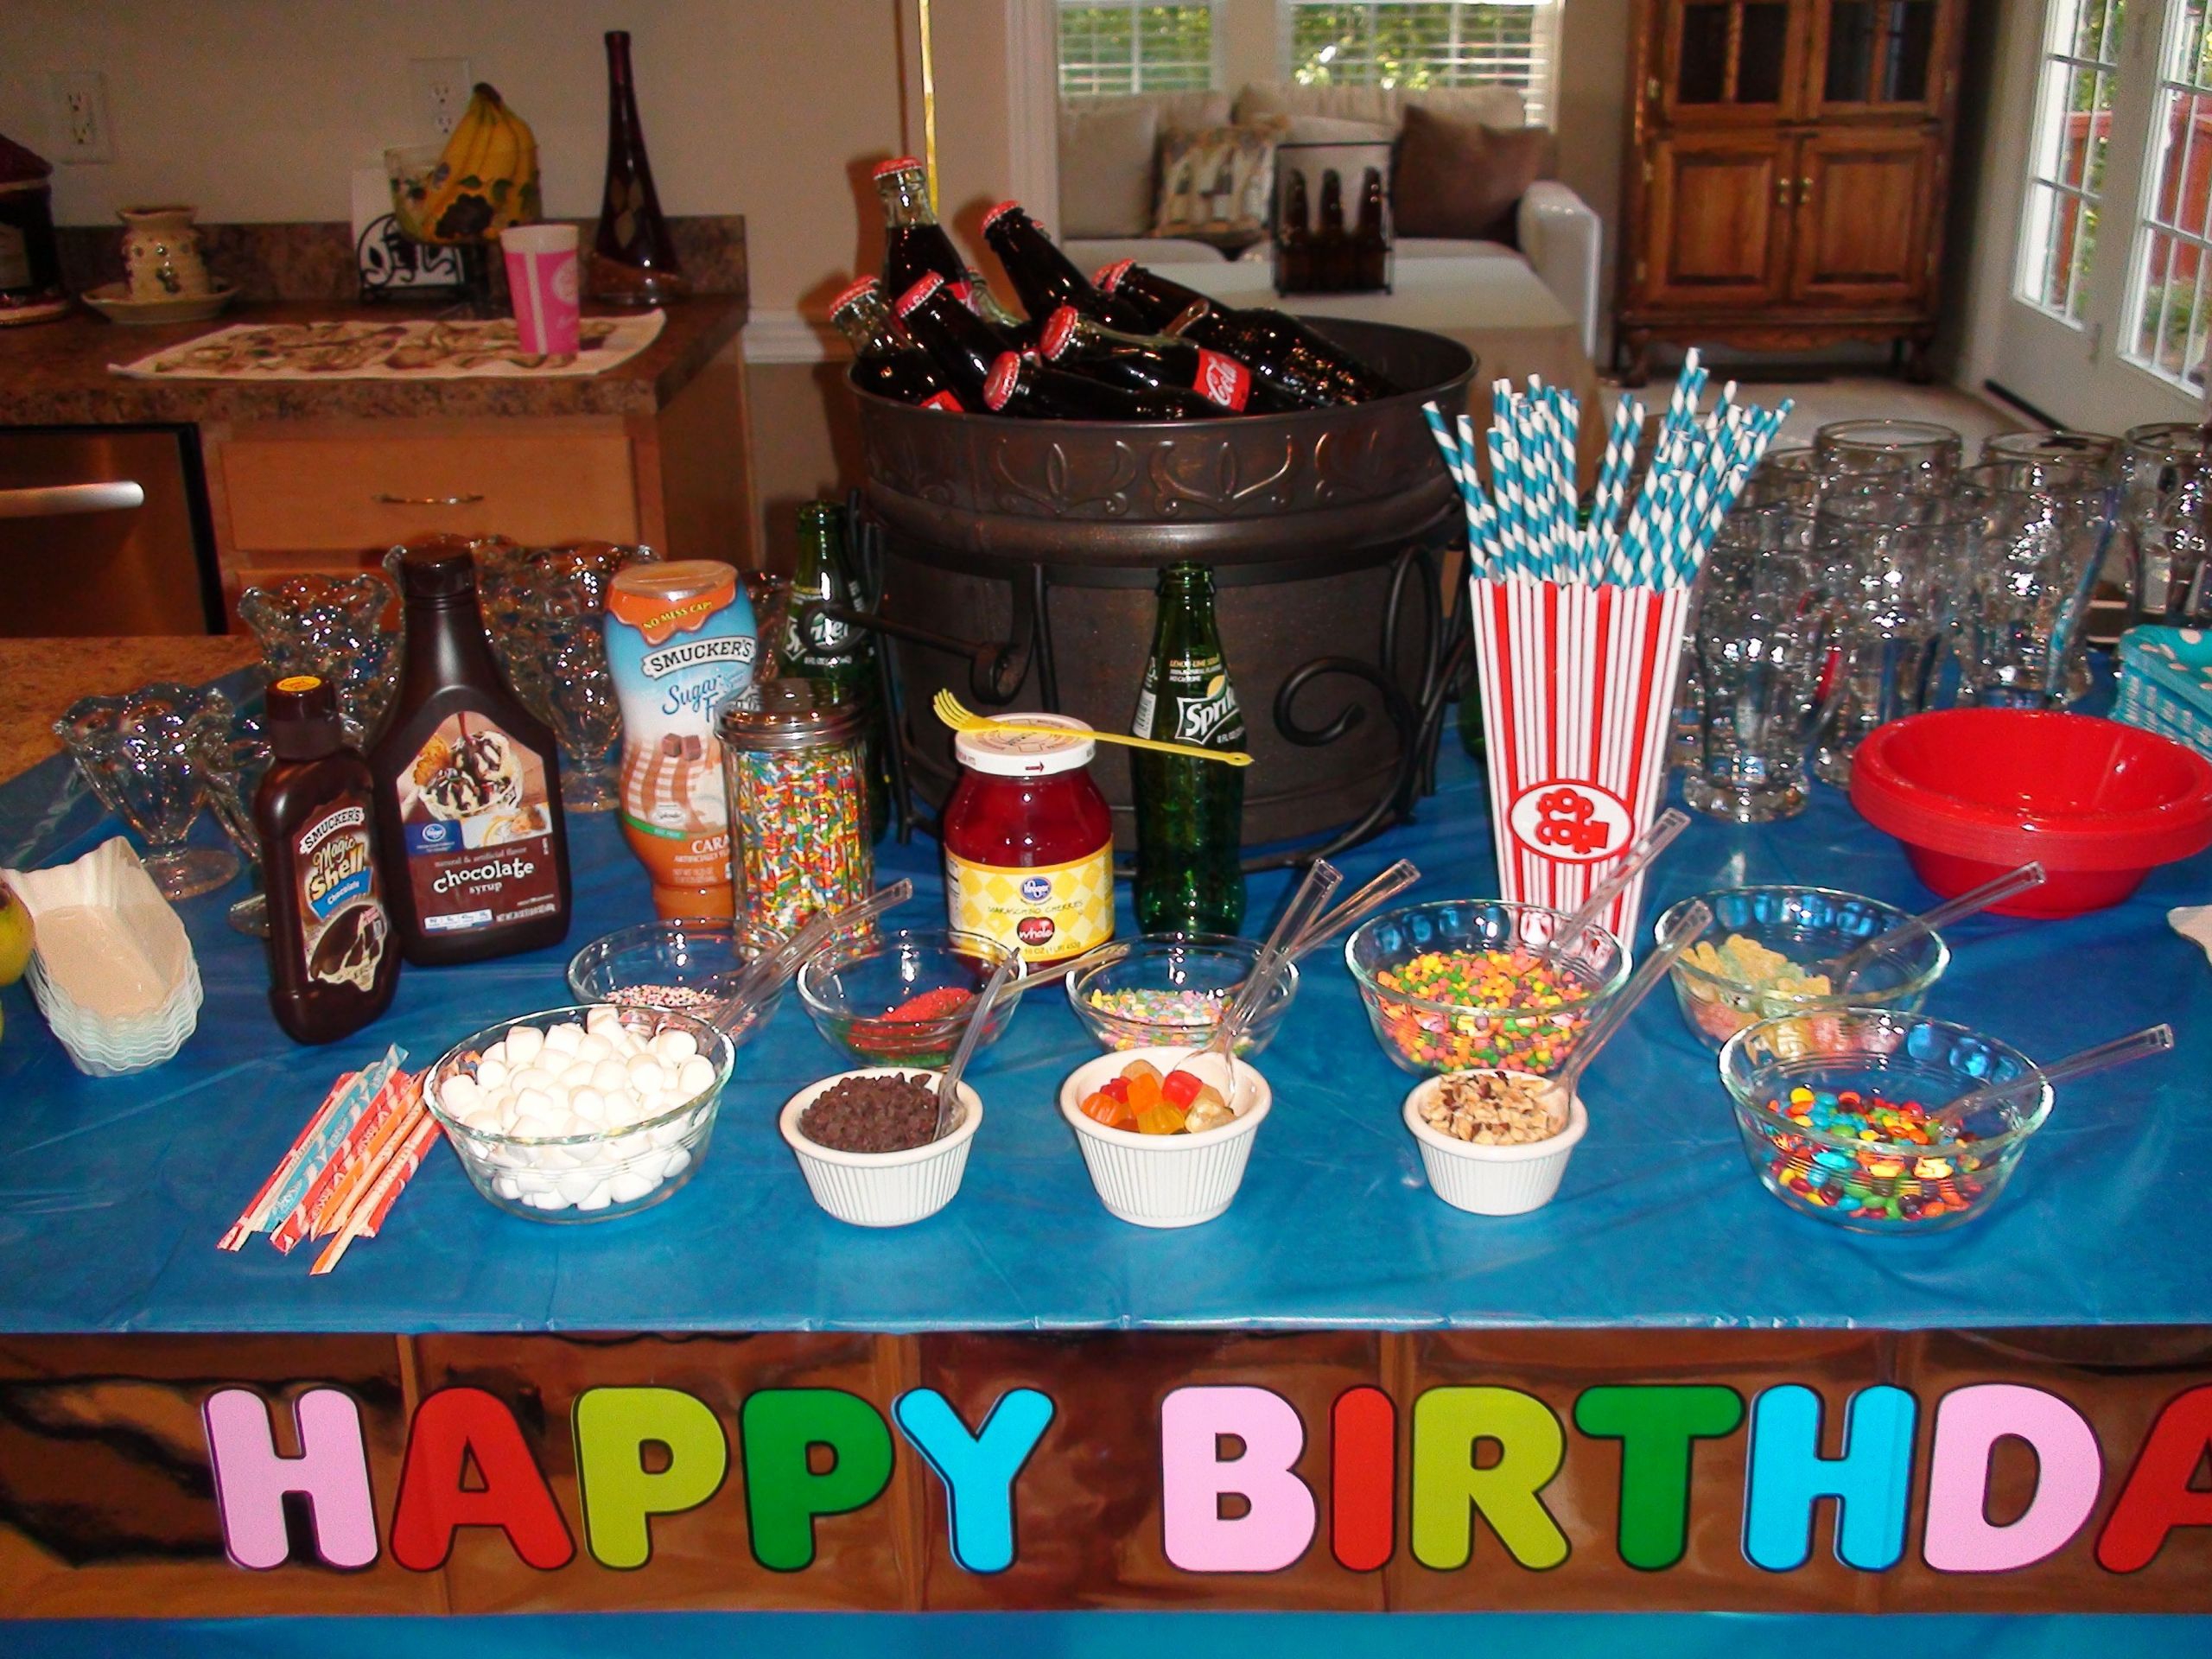 12 Yr Old Birthday Party Ideas Girl
 12 year old party root beer floats banana splits ice